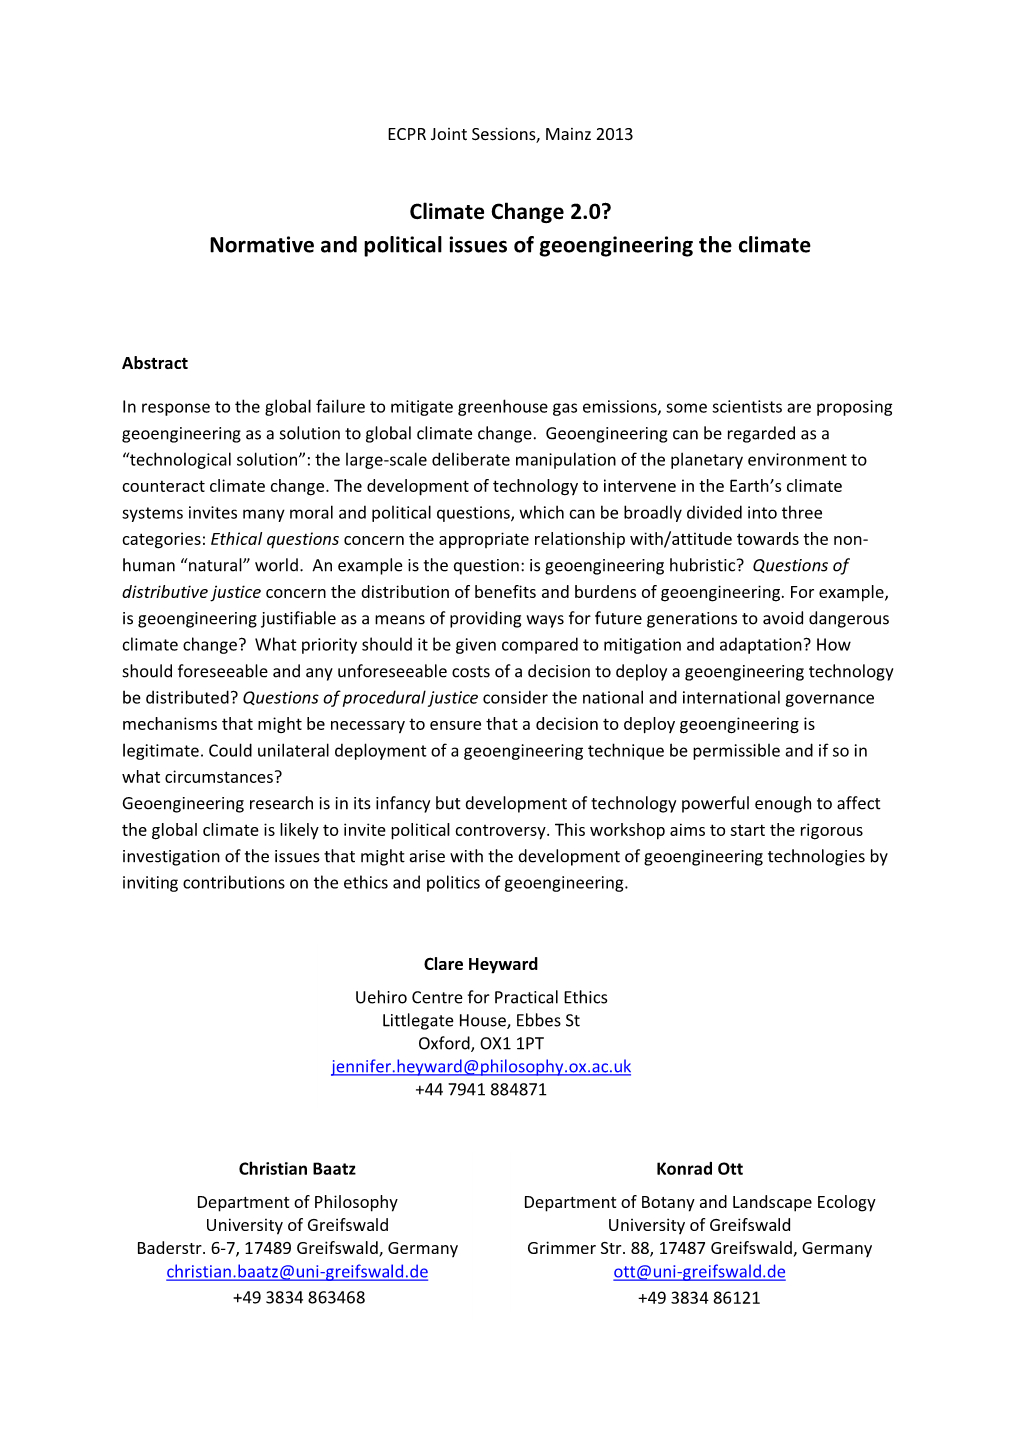 Climate Change 2.0? Normative and Political Issues of Geoengineering the Climate